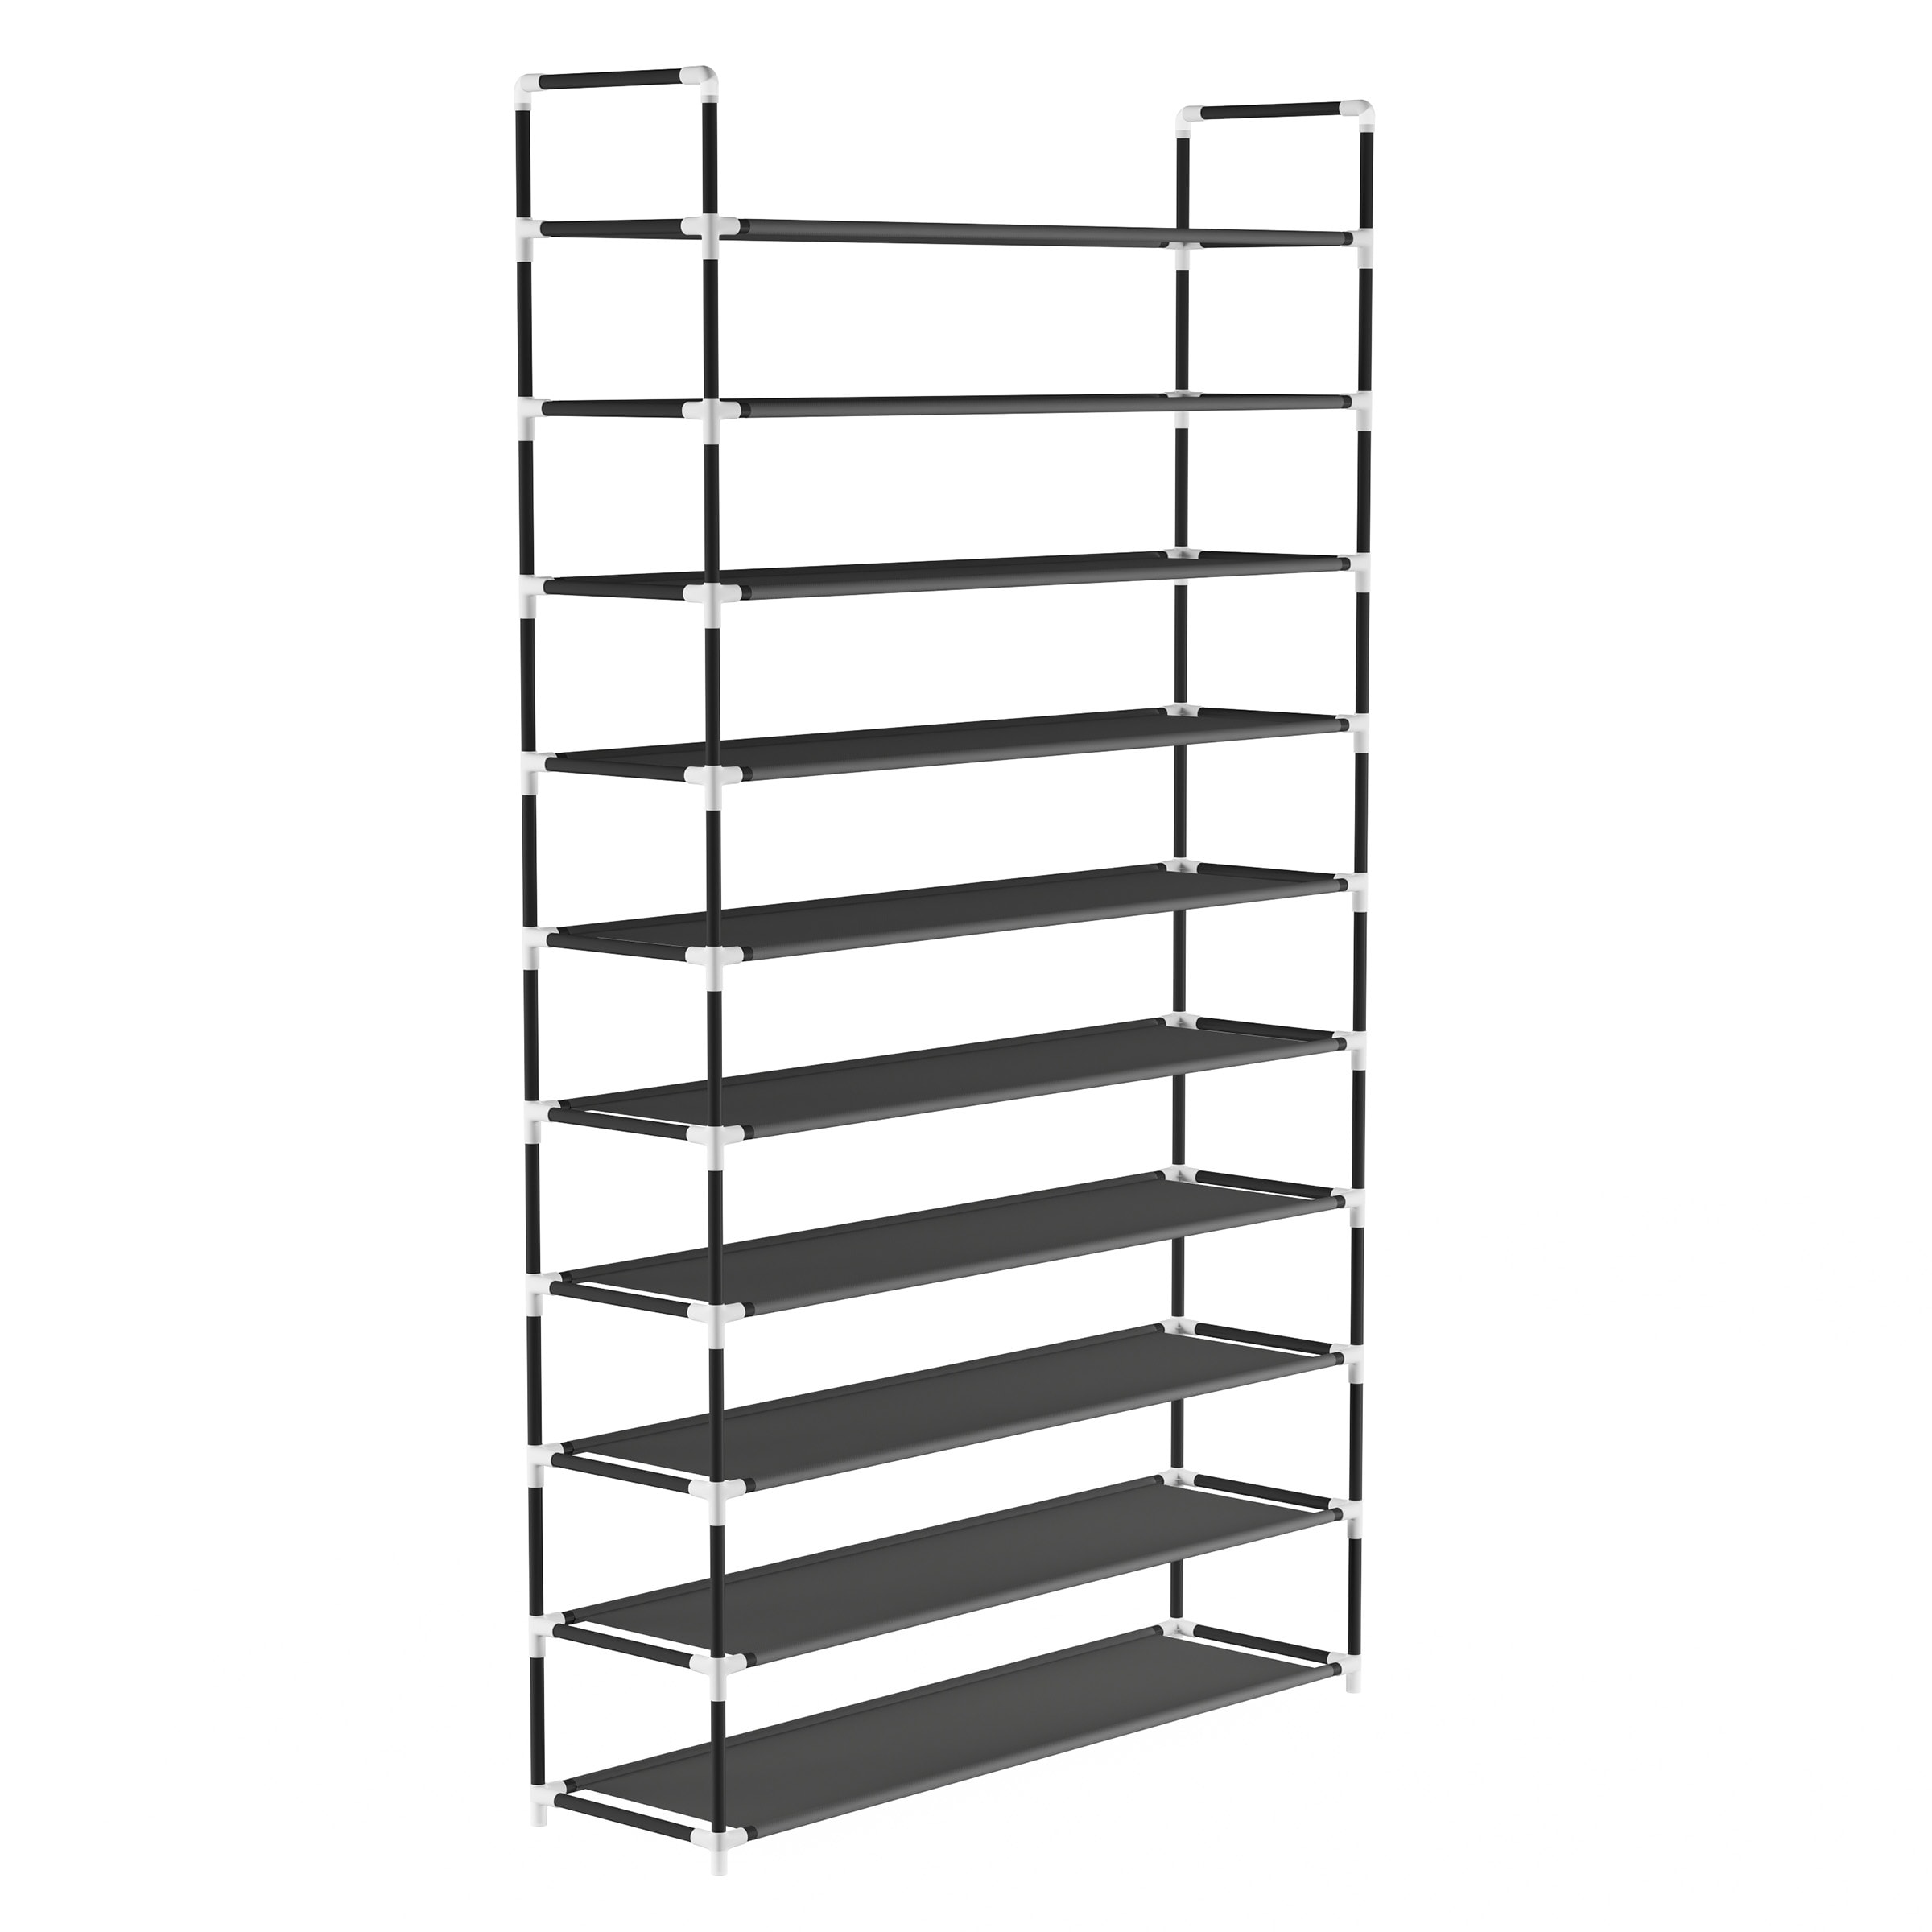 https://ak1.ostkcdn.com/images/products/is/images/direct/5d8e8dce1dbd98f29d6fba92fb0ee4d0780b4030/Shoe-Rack--Tiered-Storage-for-Sneakers%2C-Heels%2C-Flats%2C-Accessories%2C-and-More-Space-Saving-Organization-by-Lavish-Home.jpg